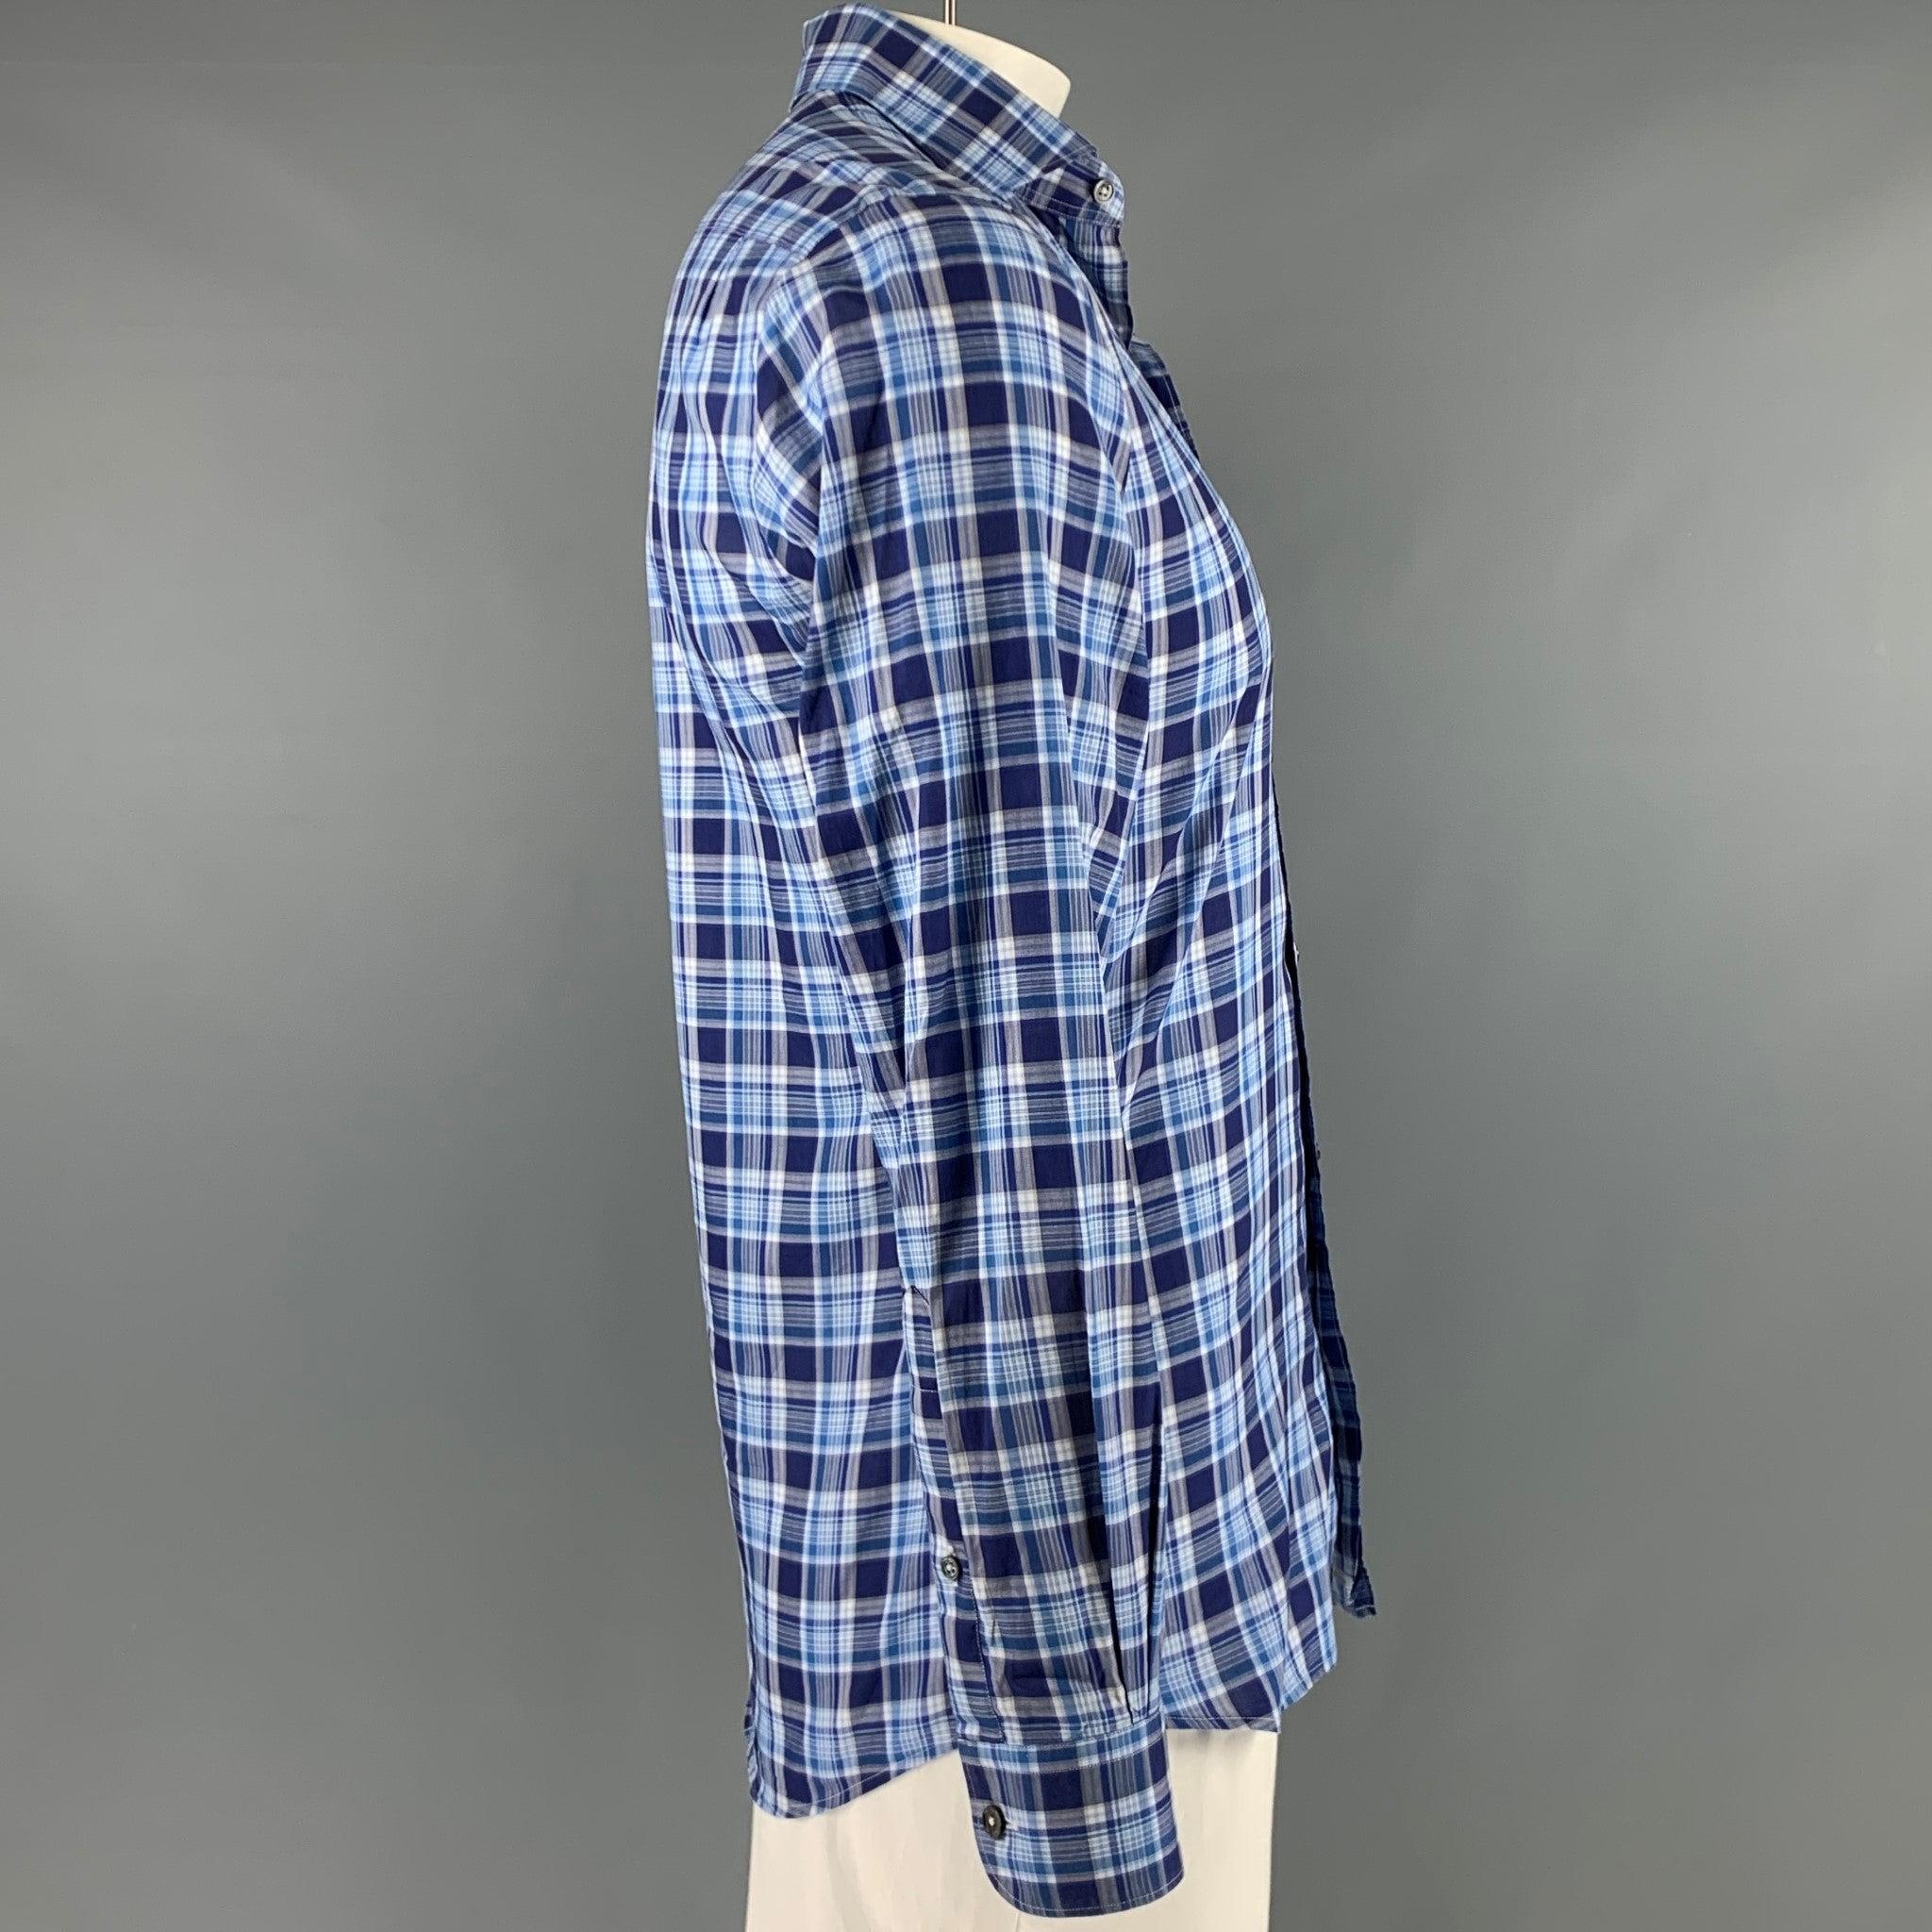 ERMENEGILDO ZEGNA long sleeve shirt
in a blue and white cotton fabric featuring a plaid pattern, spread collar, and a button closure. Excellent Pre-Owned Condition. 

Marked:   S 

Measurements: 
 
Shoulder: 16.5 inches Chest: 40 inches Sleeve: 25.5